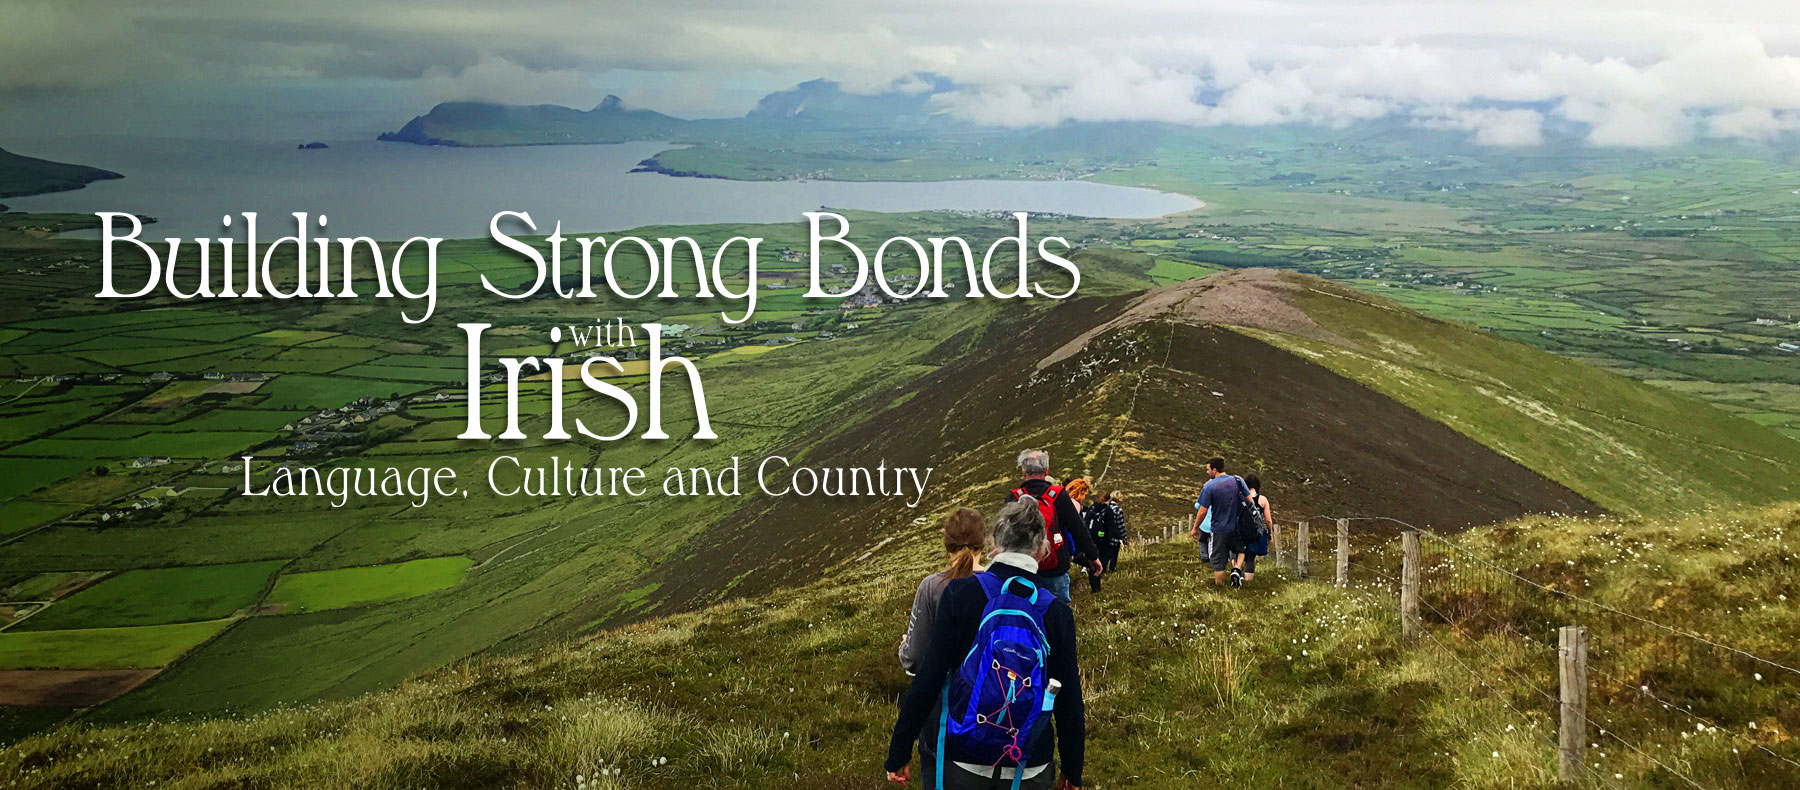 Building strong bonds with Irish language, culture and country